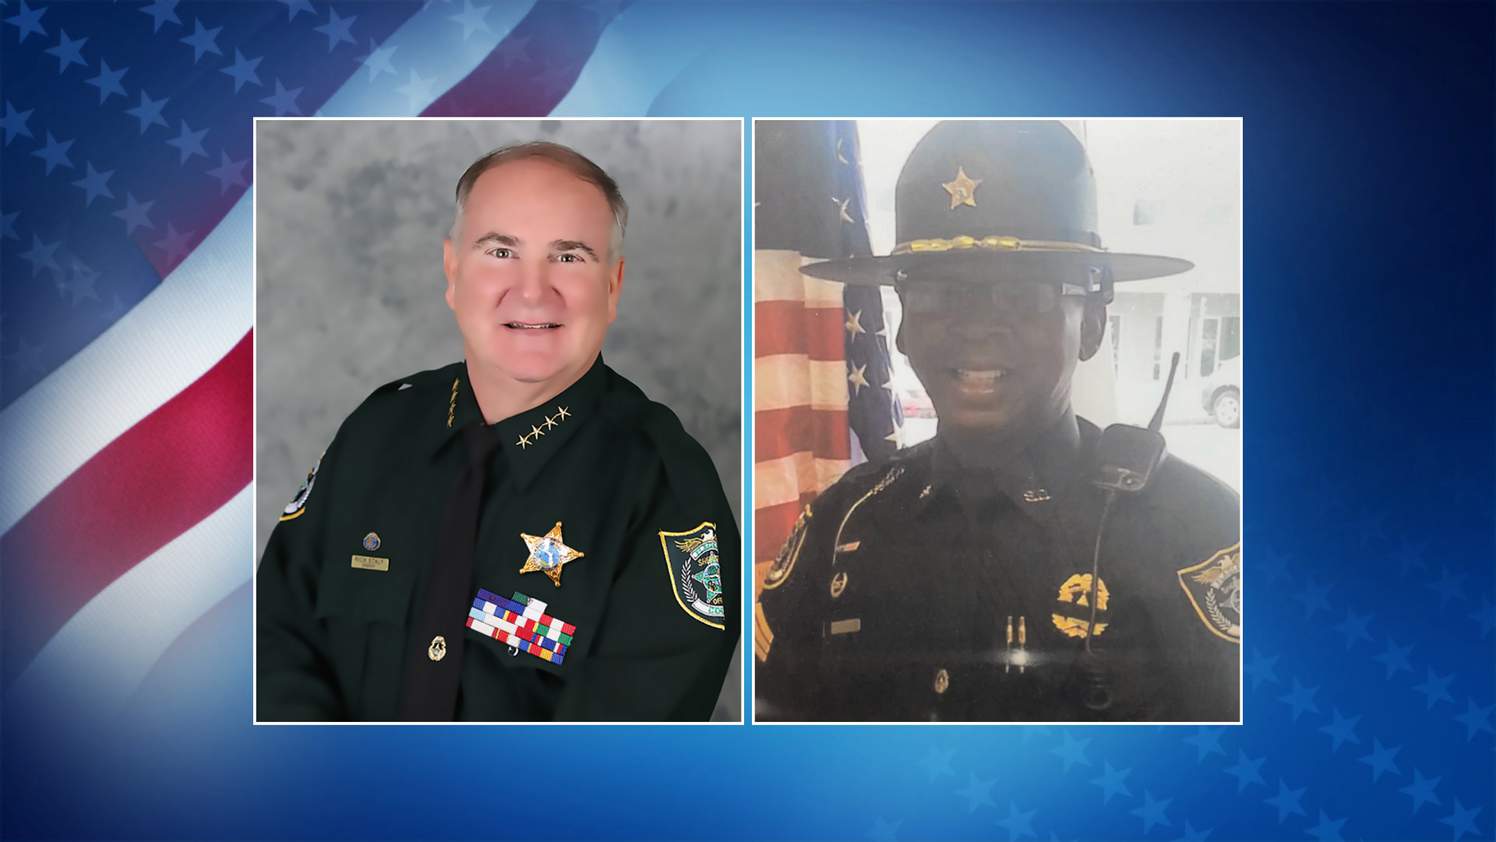 Meet the candidates: Here’s who’s running for Flagler County sheriff